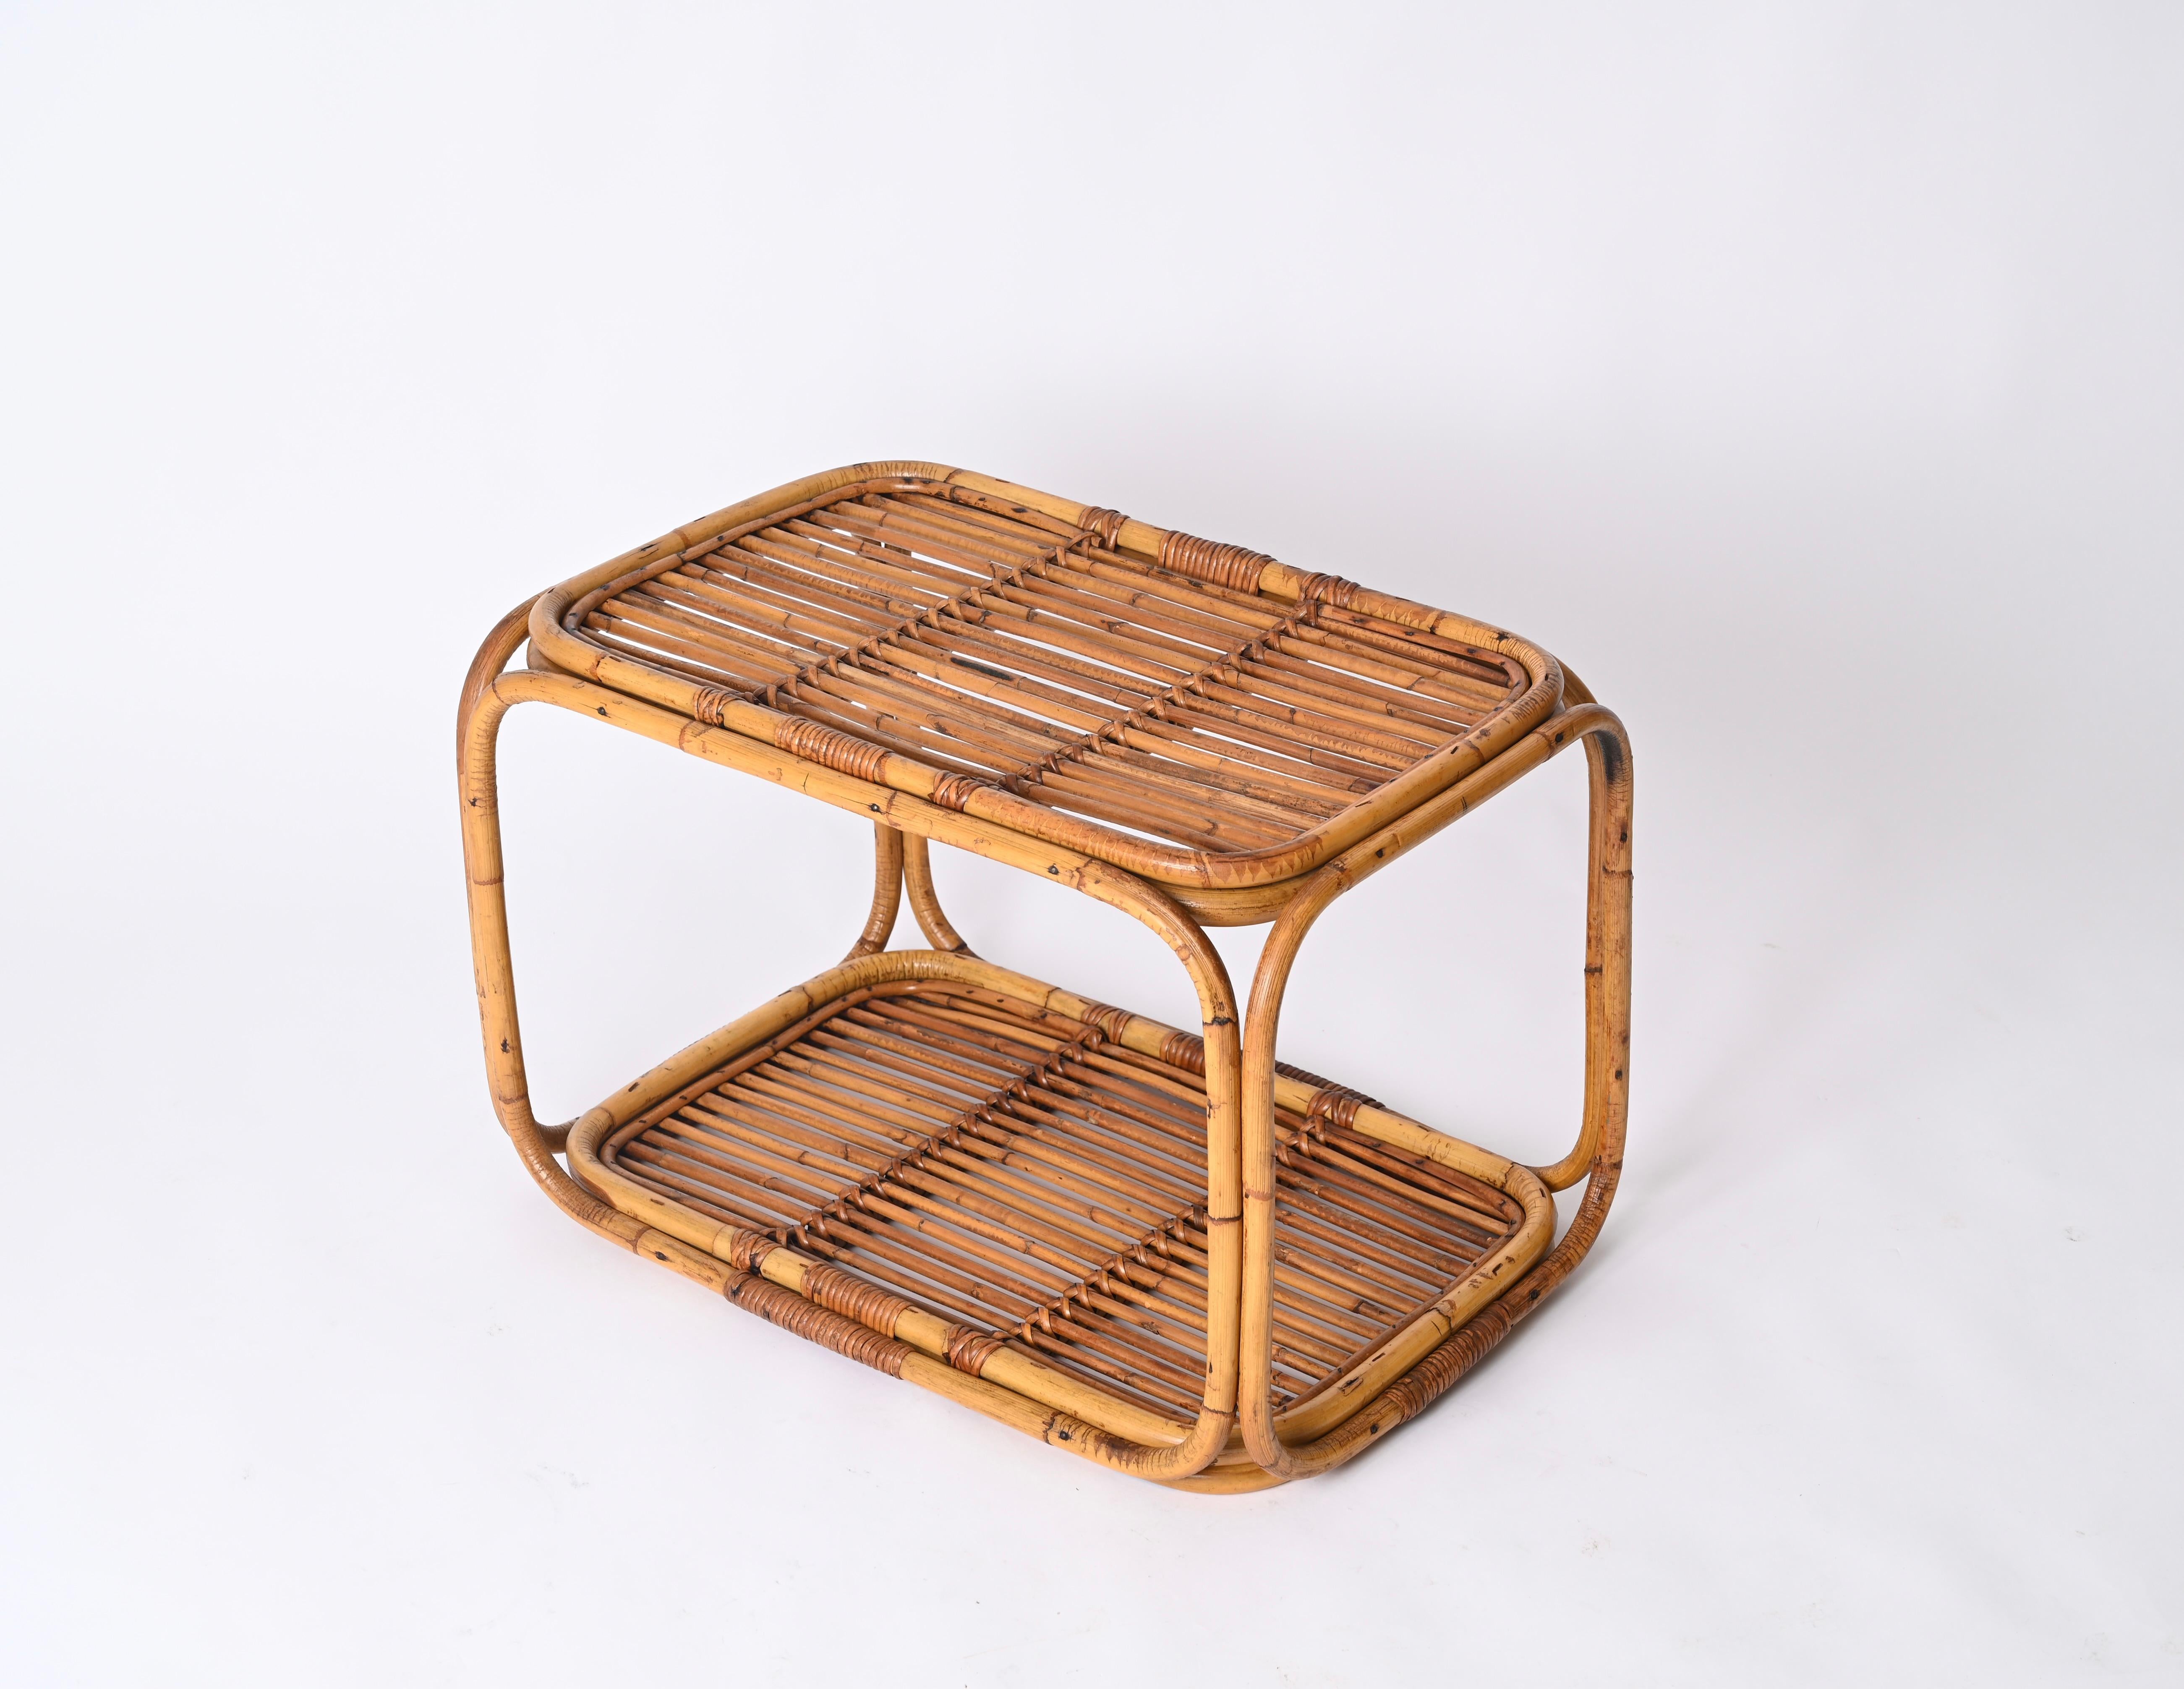 Midcentury Bamboo and Rattan Italian Rectangular Coffee Table, 1960s For Sale 6